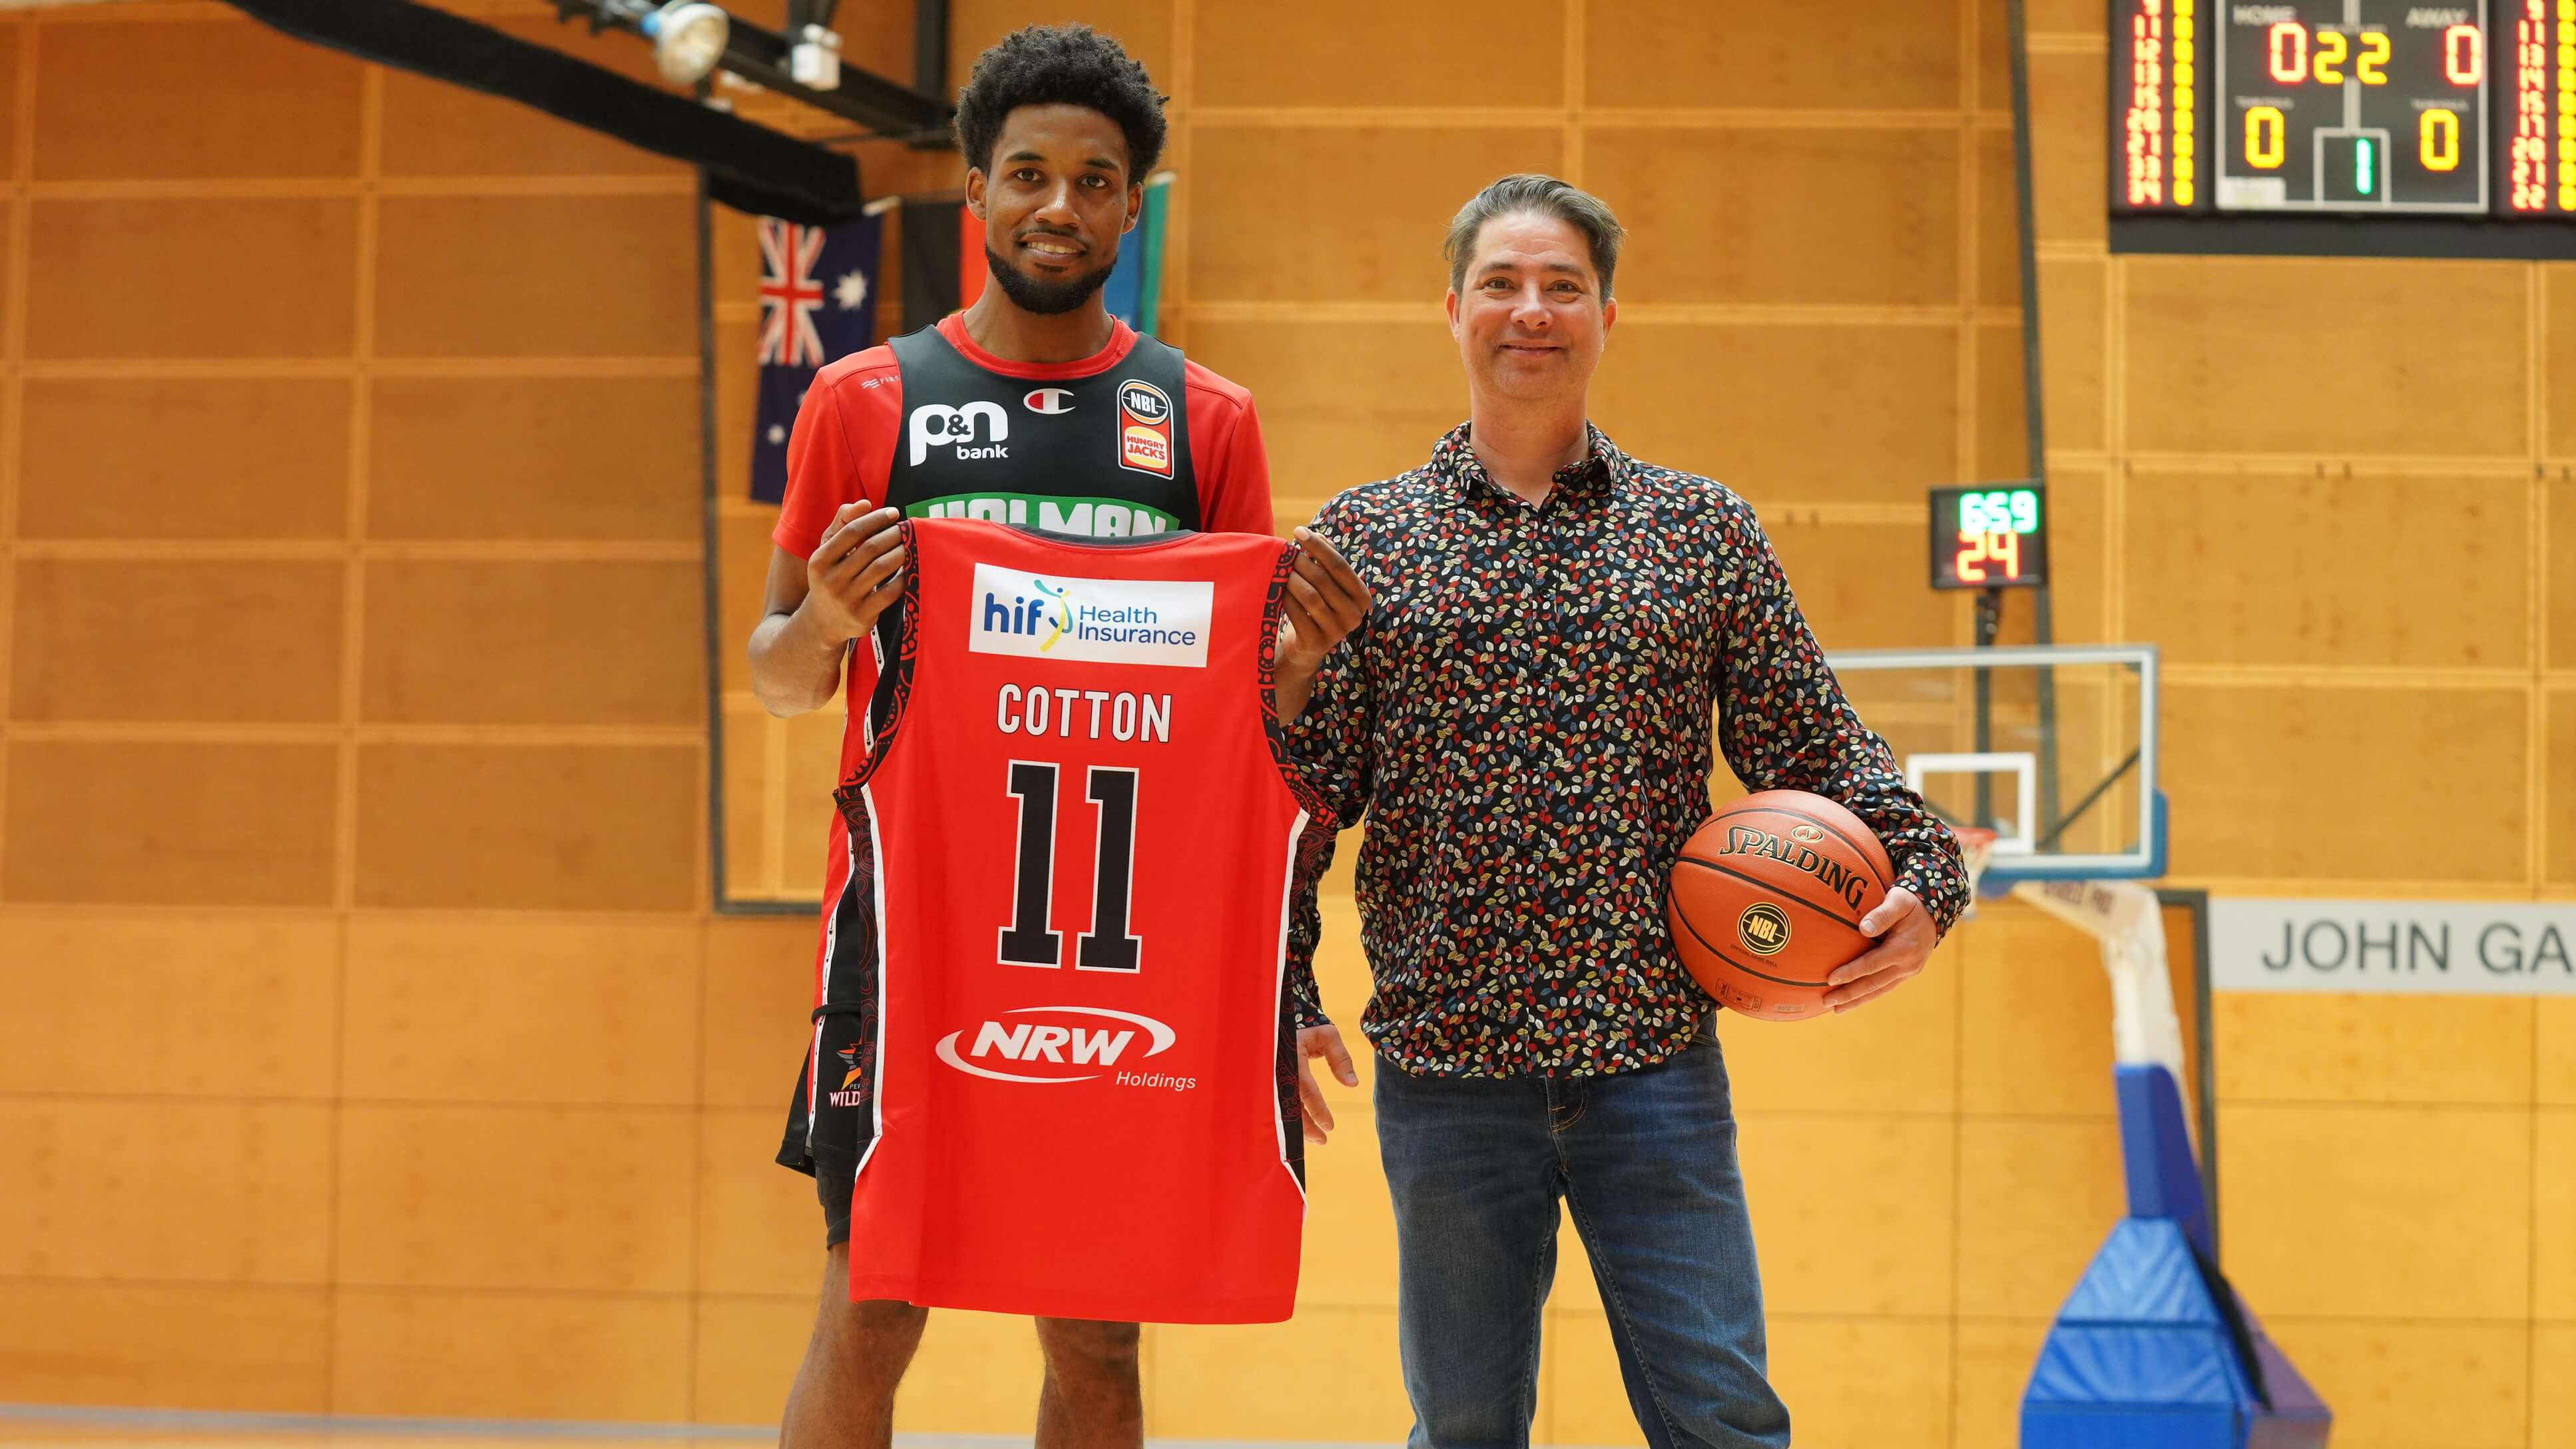 WA health insurer HIF continues strong partnership with Perth Wildcats